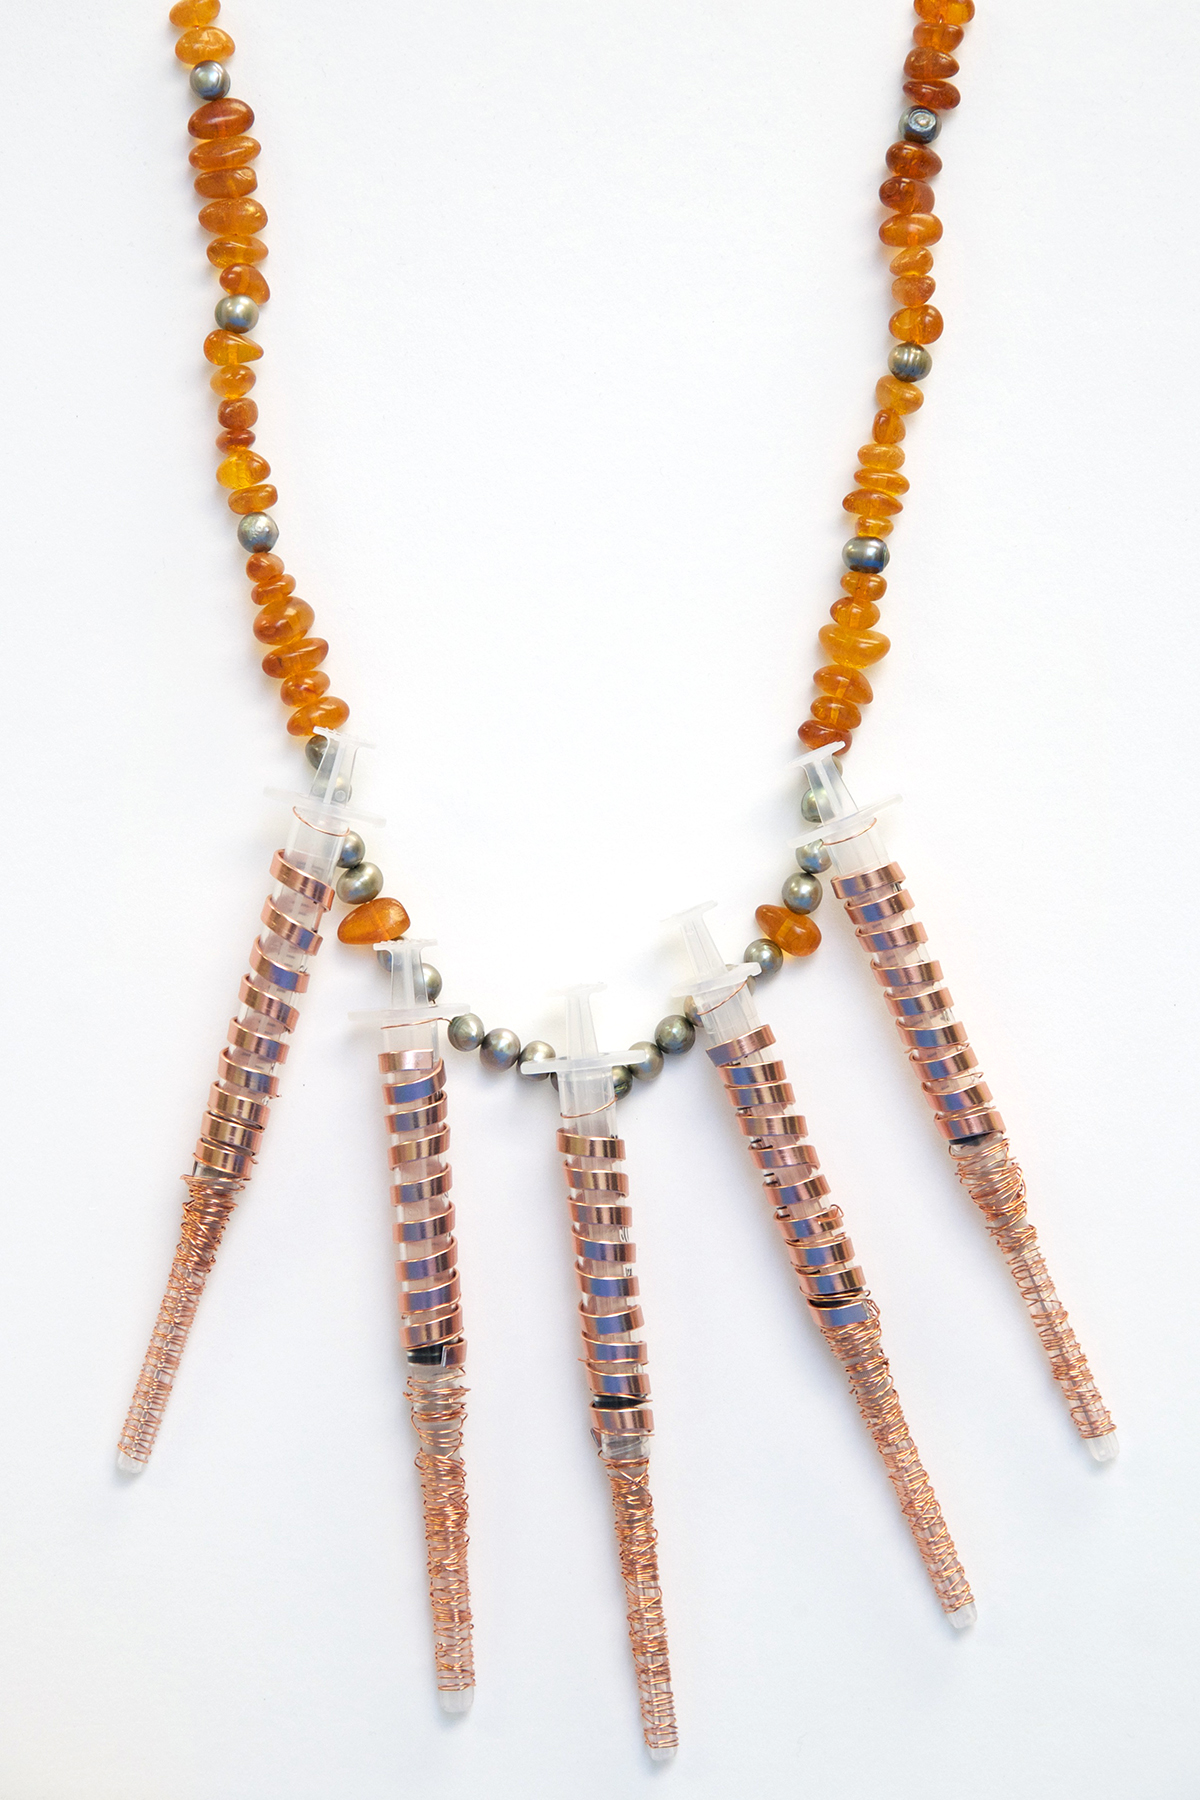 A necklace containing amber beads and syringes.